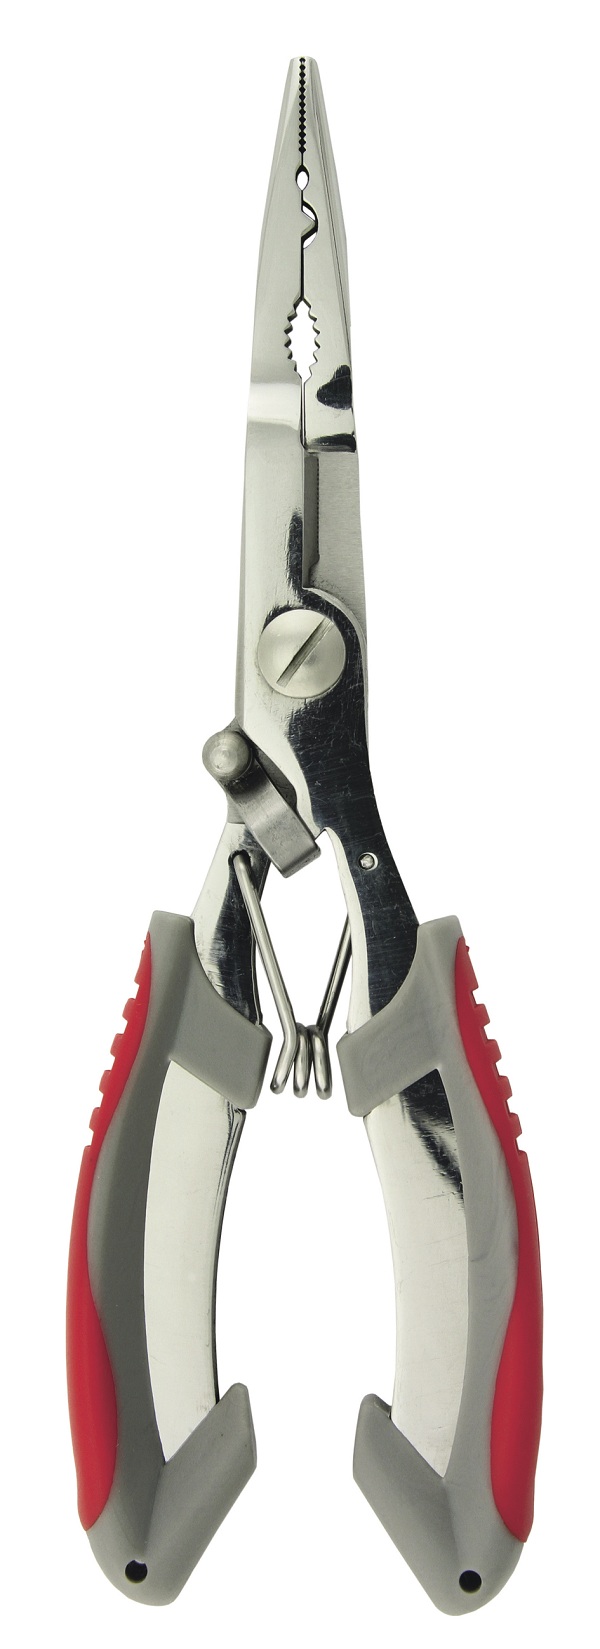 XXX Marine Stainless Steel Fishing Pliers - Long Nose - Online